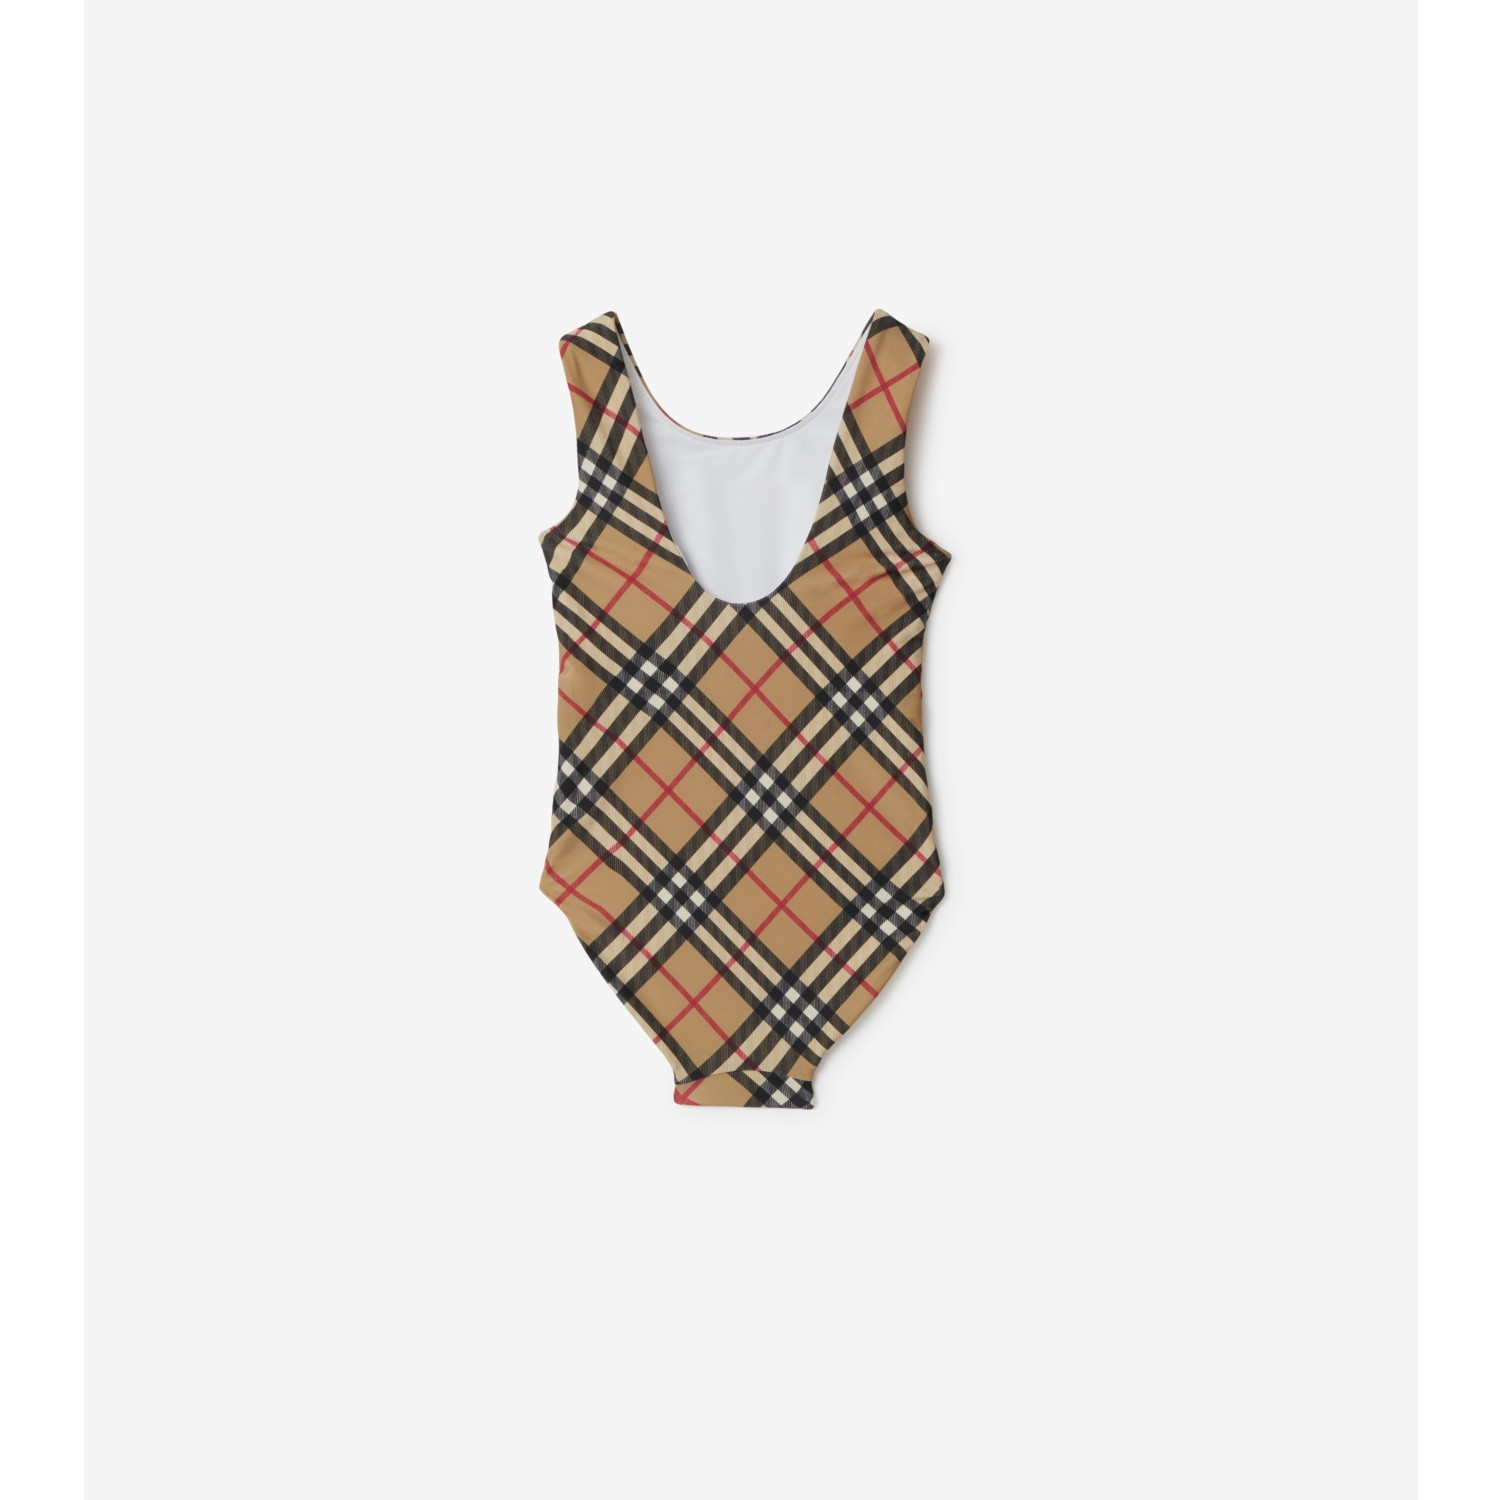 Burberry Girls' Liana Vintage Check Two-Piece Swimsuit, 55% OFF